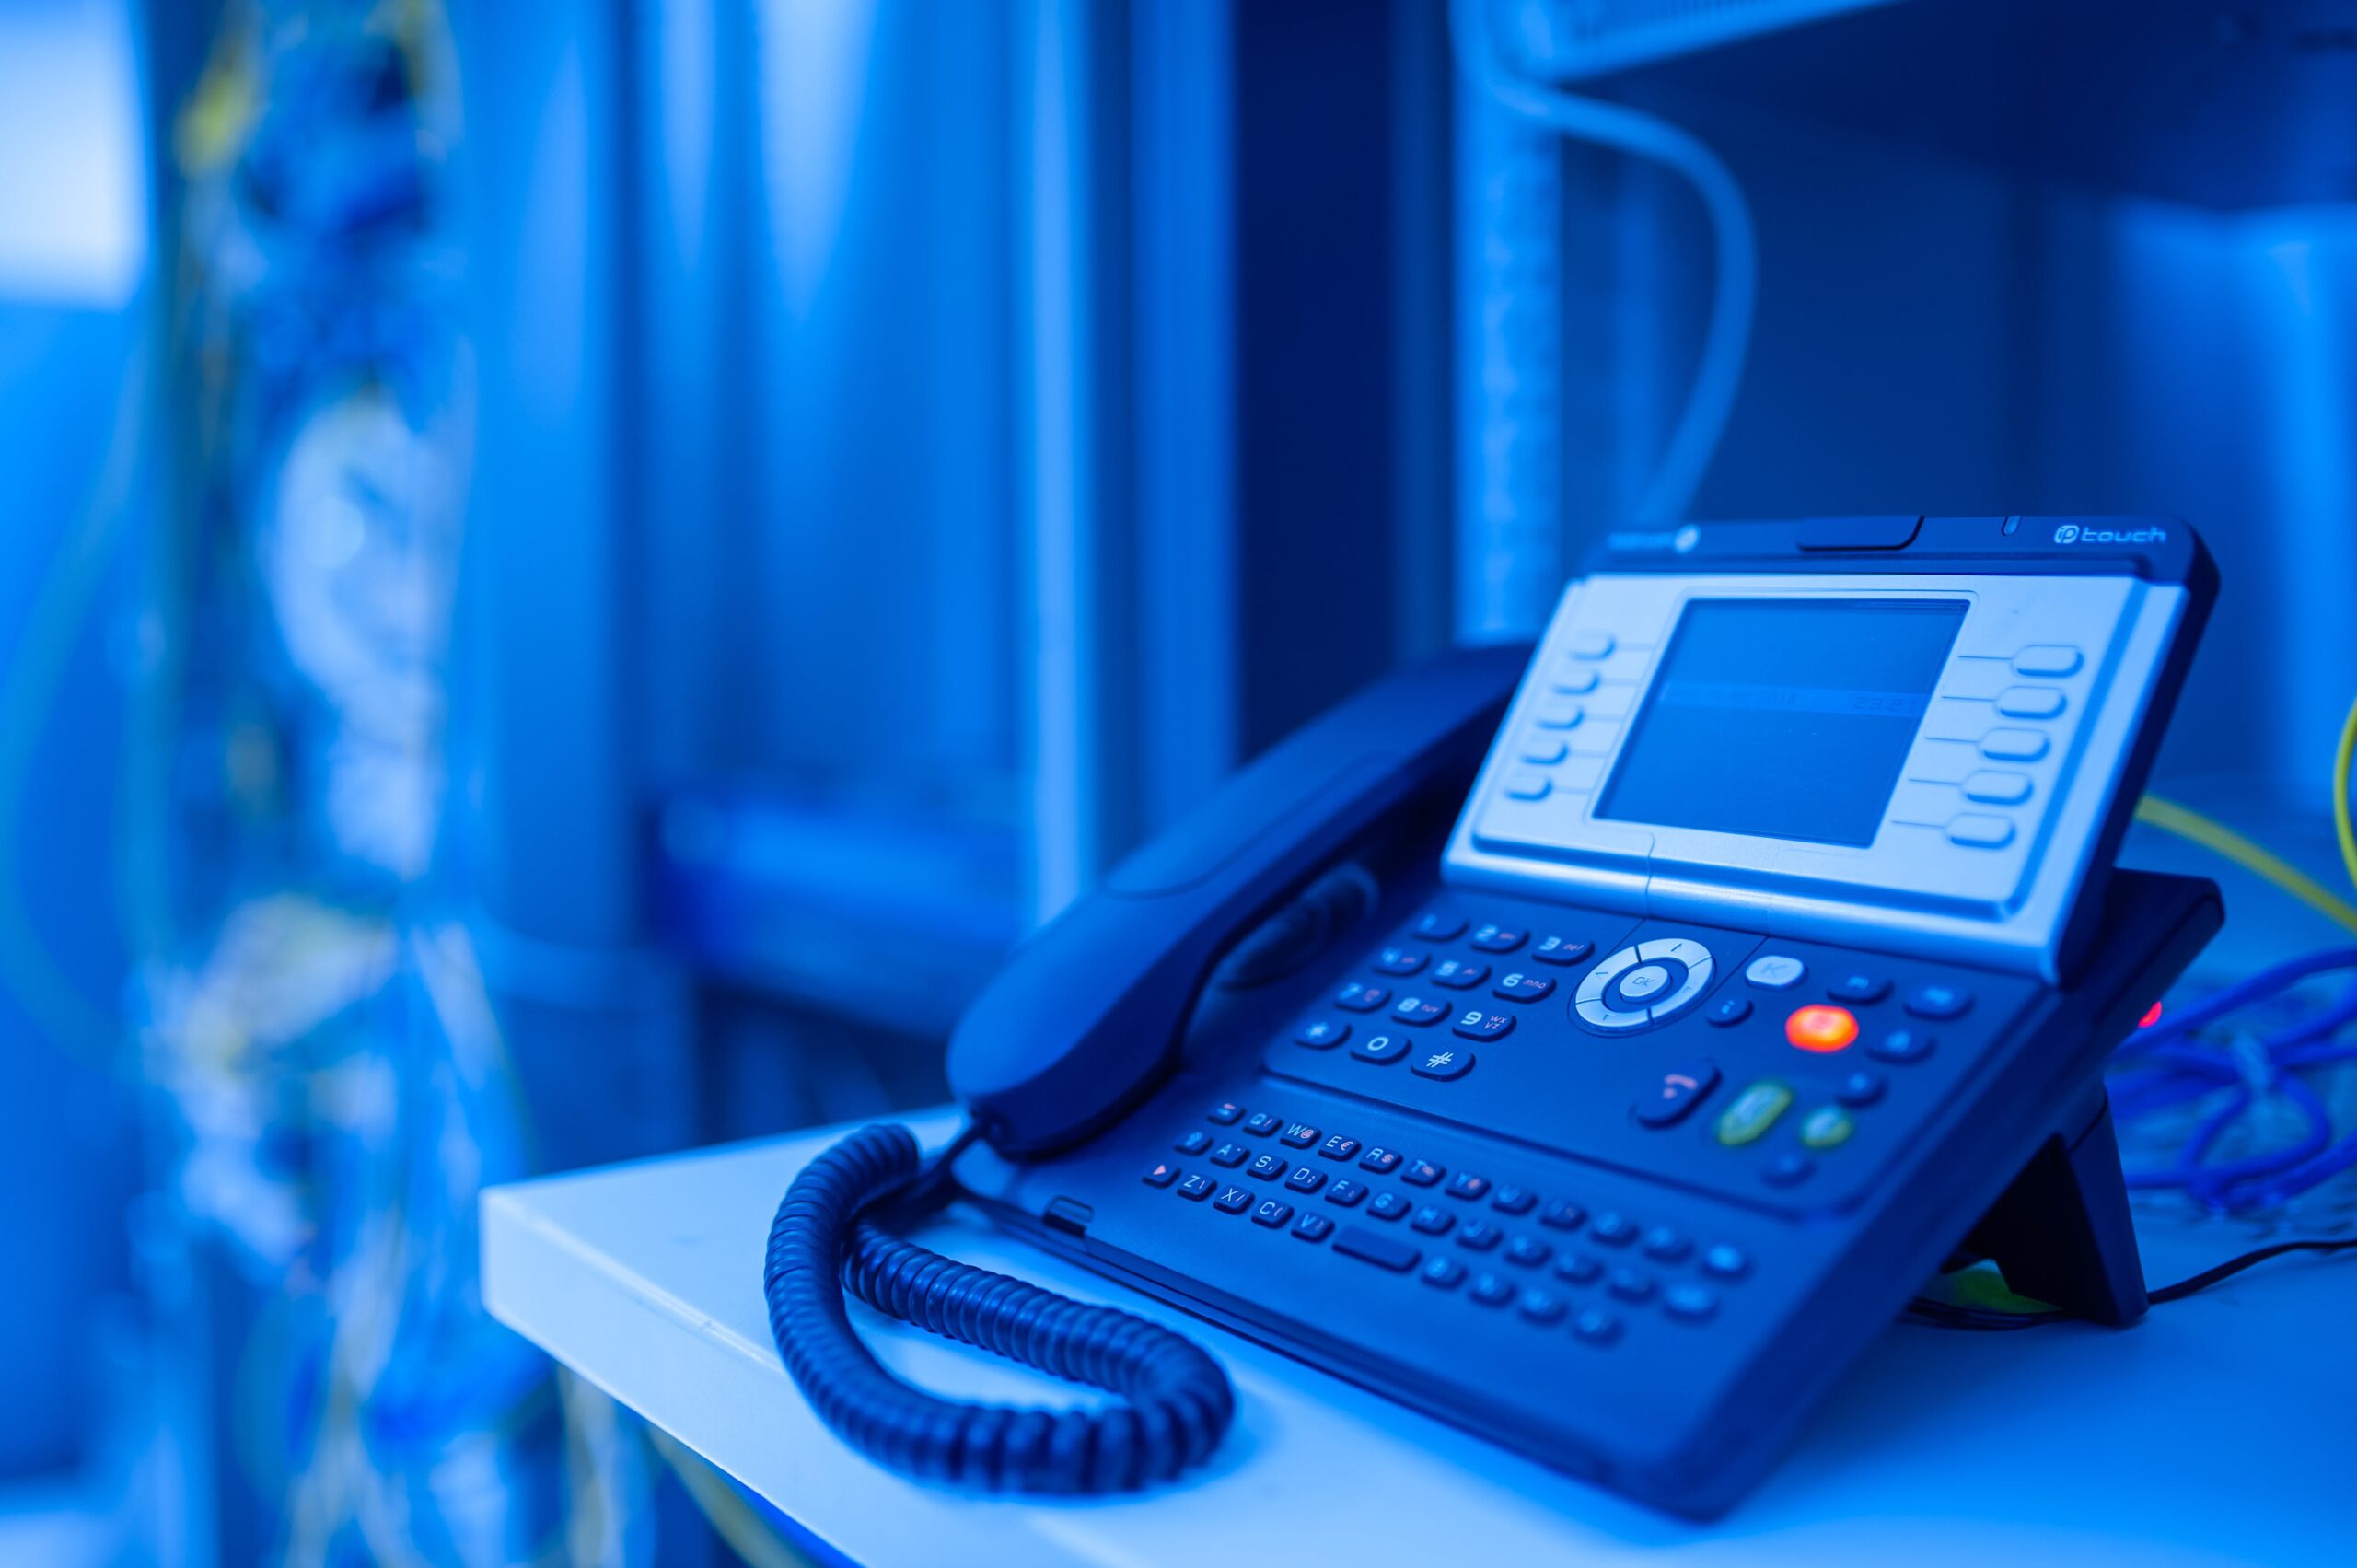 8 Best VoIP Services for Small Business in 2023